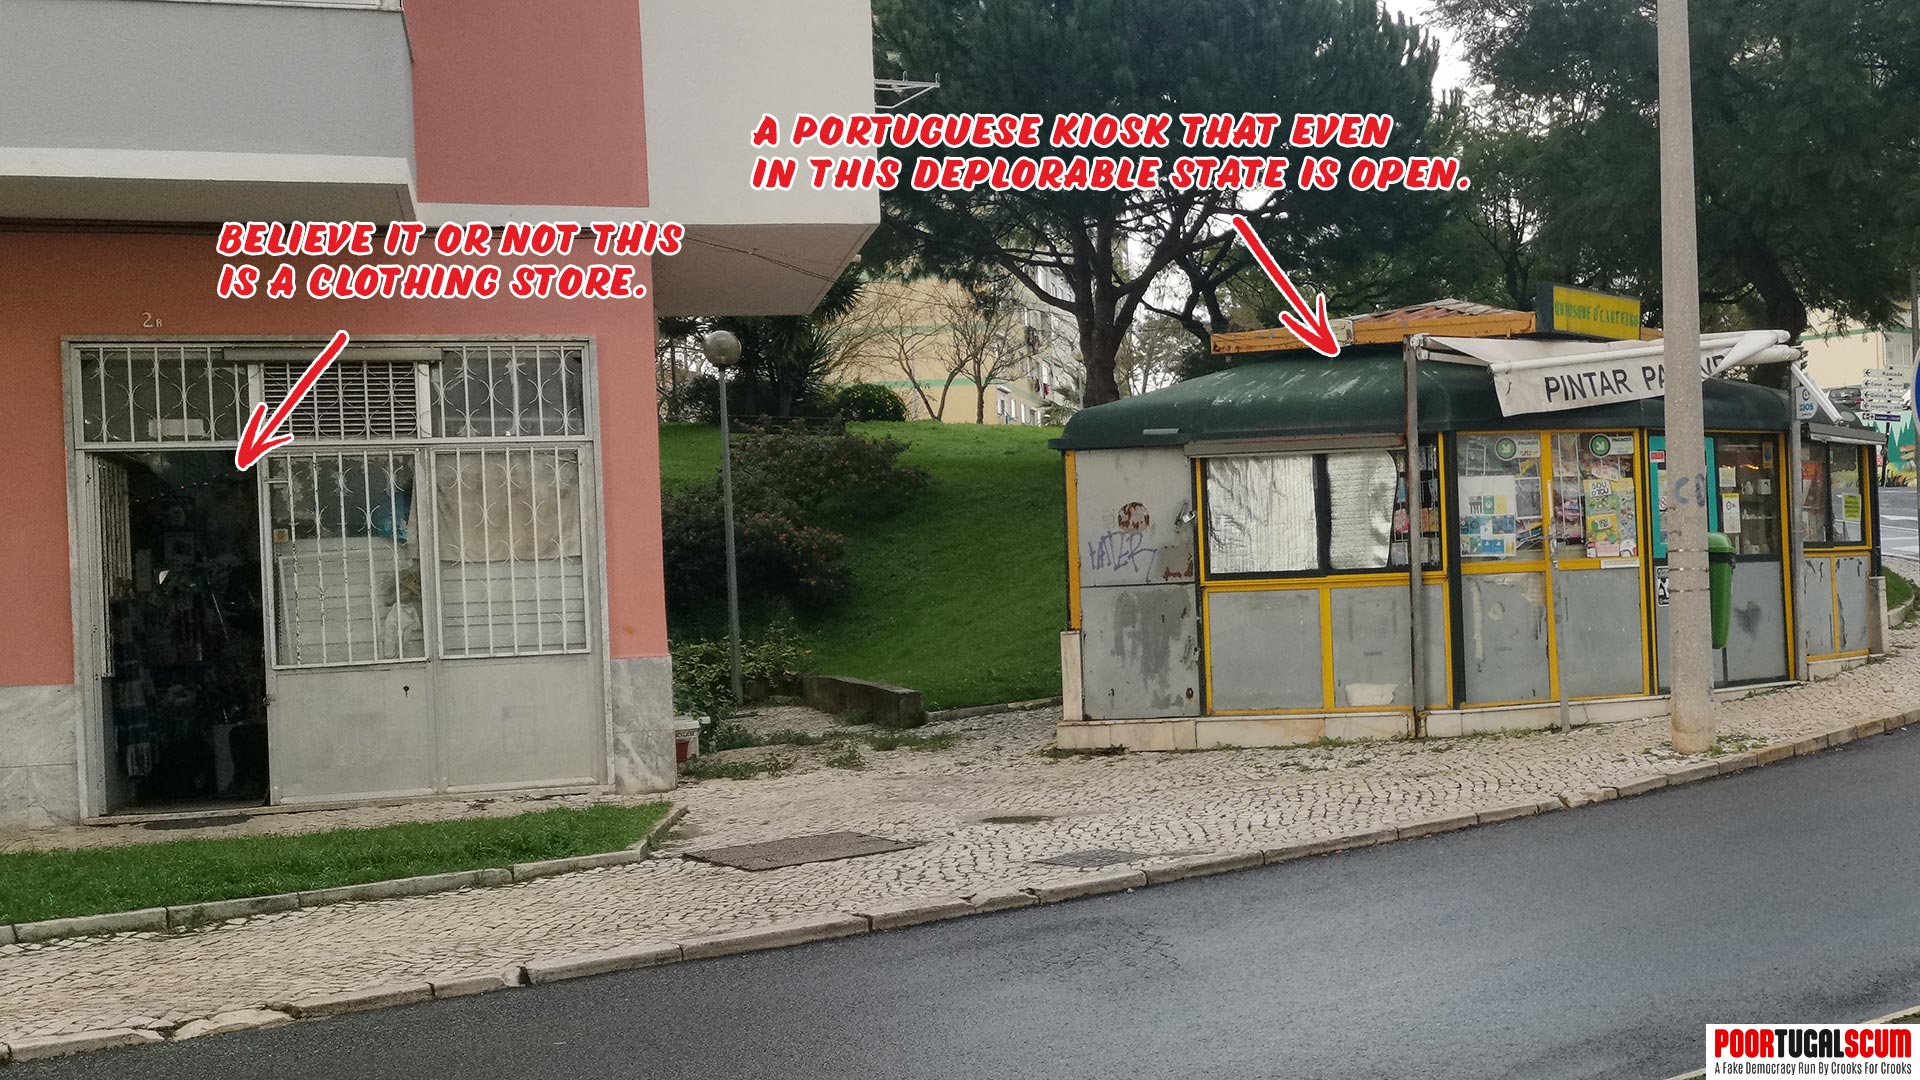 Portuguese kiosk and clothing store in deplorable condition